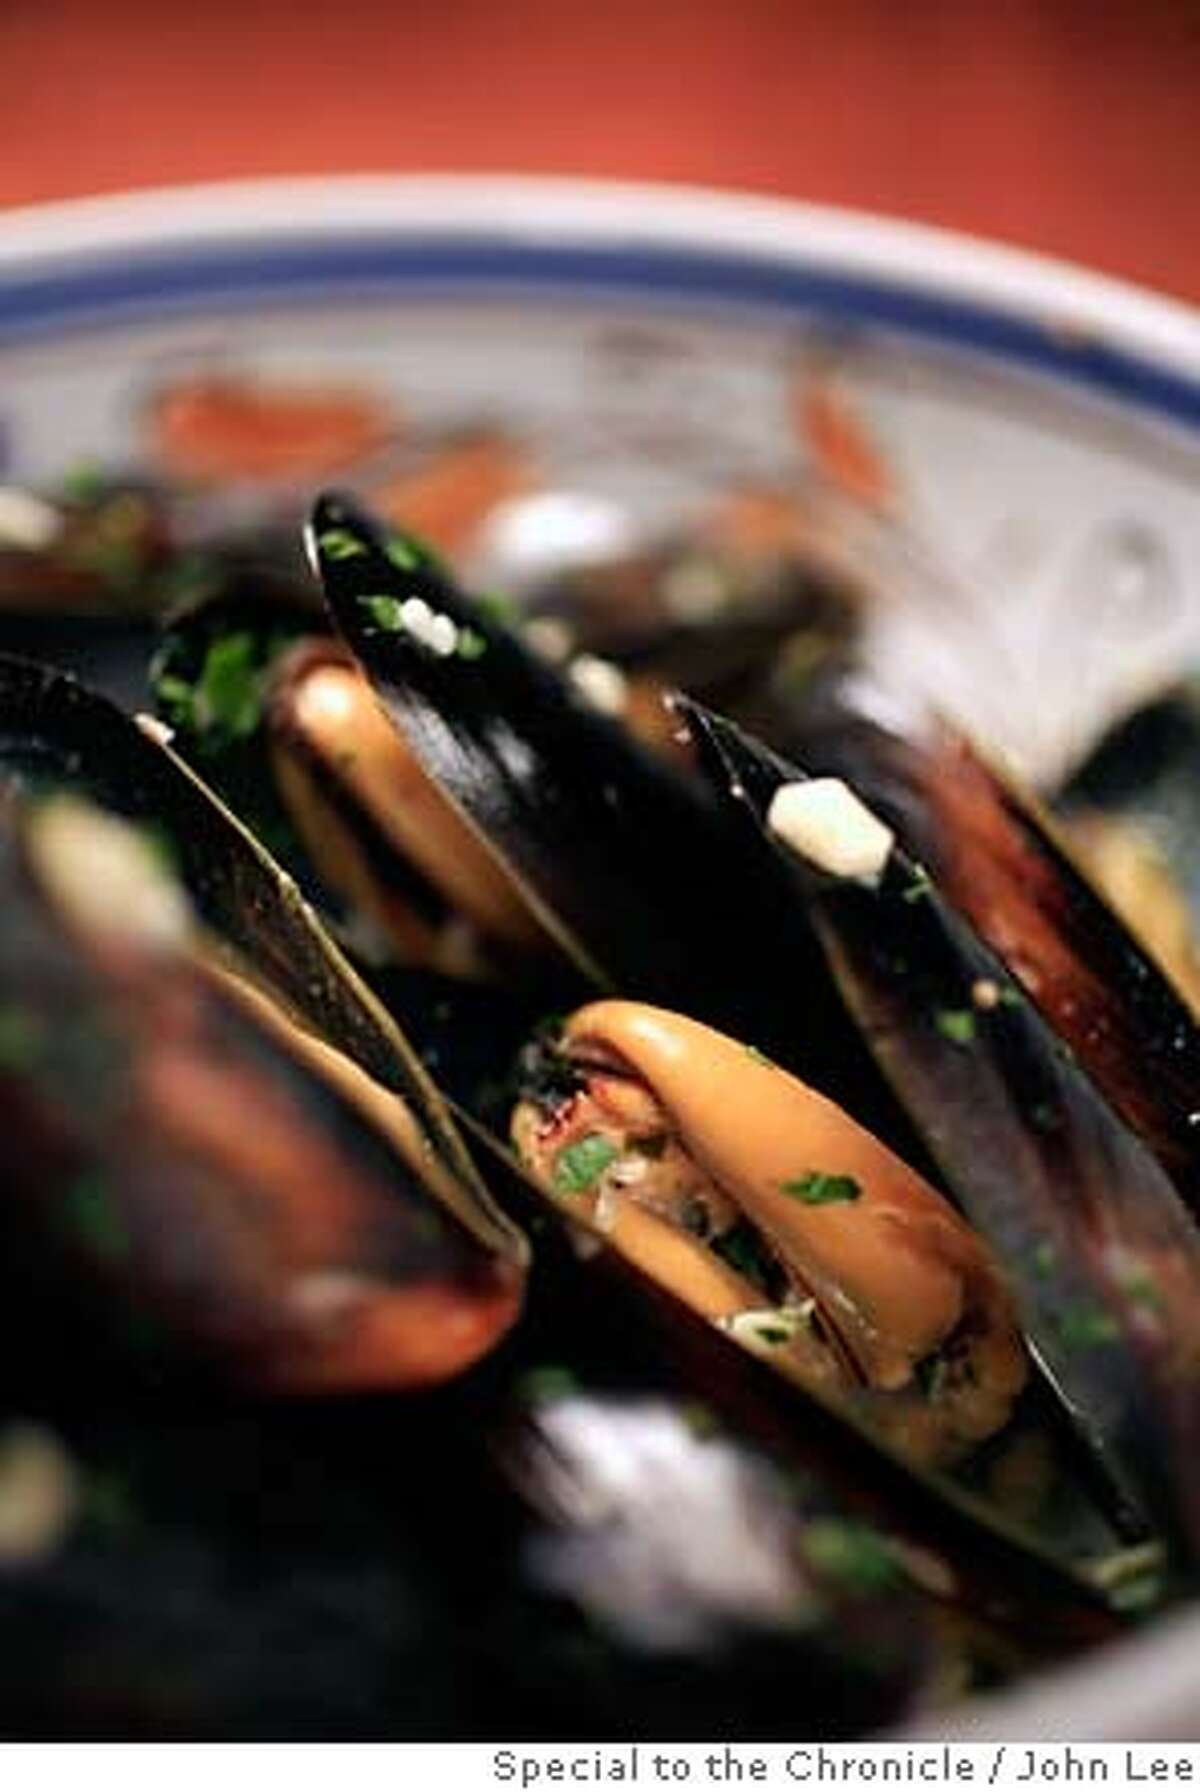 SEAFOOD29_MUSSELS_JOHNLEE.JPG Roasted Mussels. By JOHN LEE/SPECIAL TO THE CHRONICLE